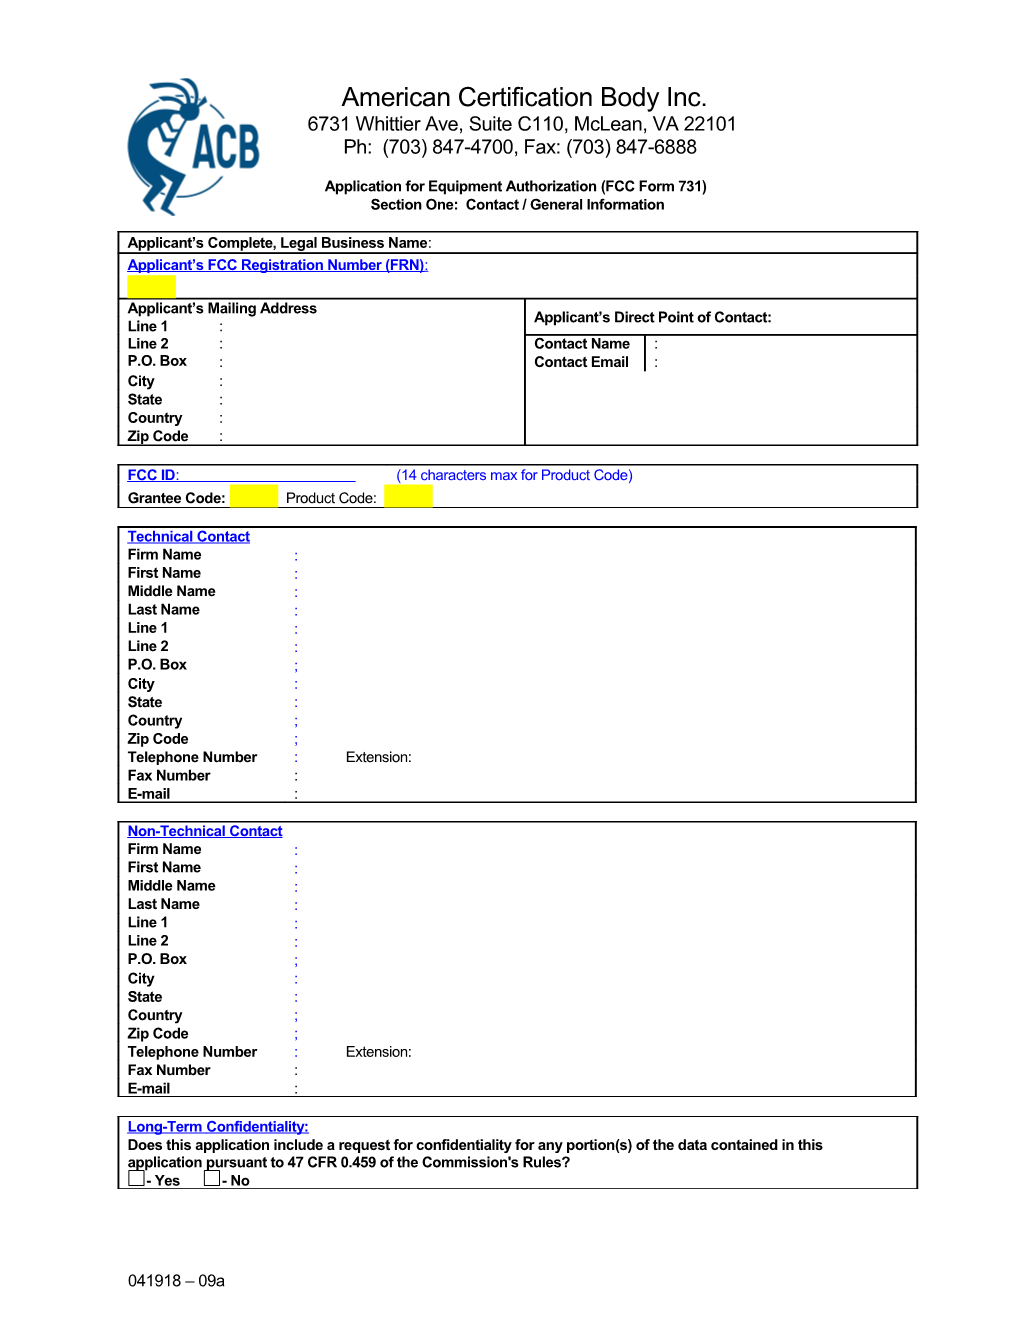 Application for Equipment Authorization (FCC Form 731)